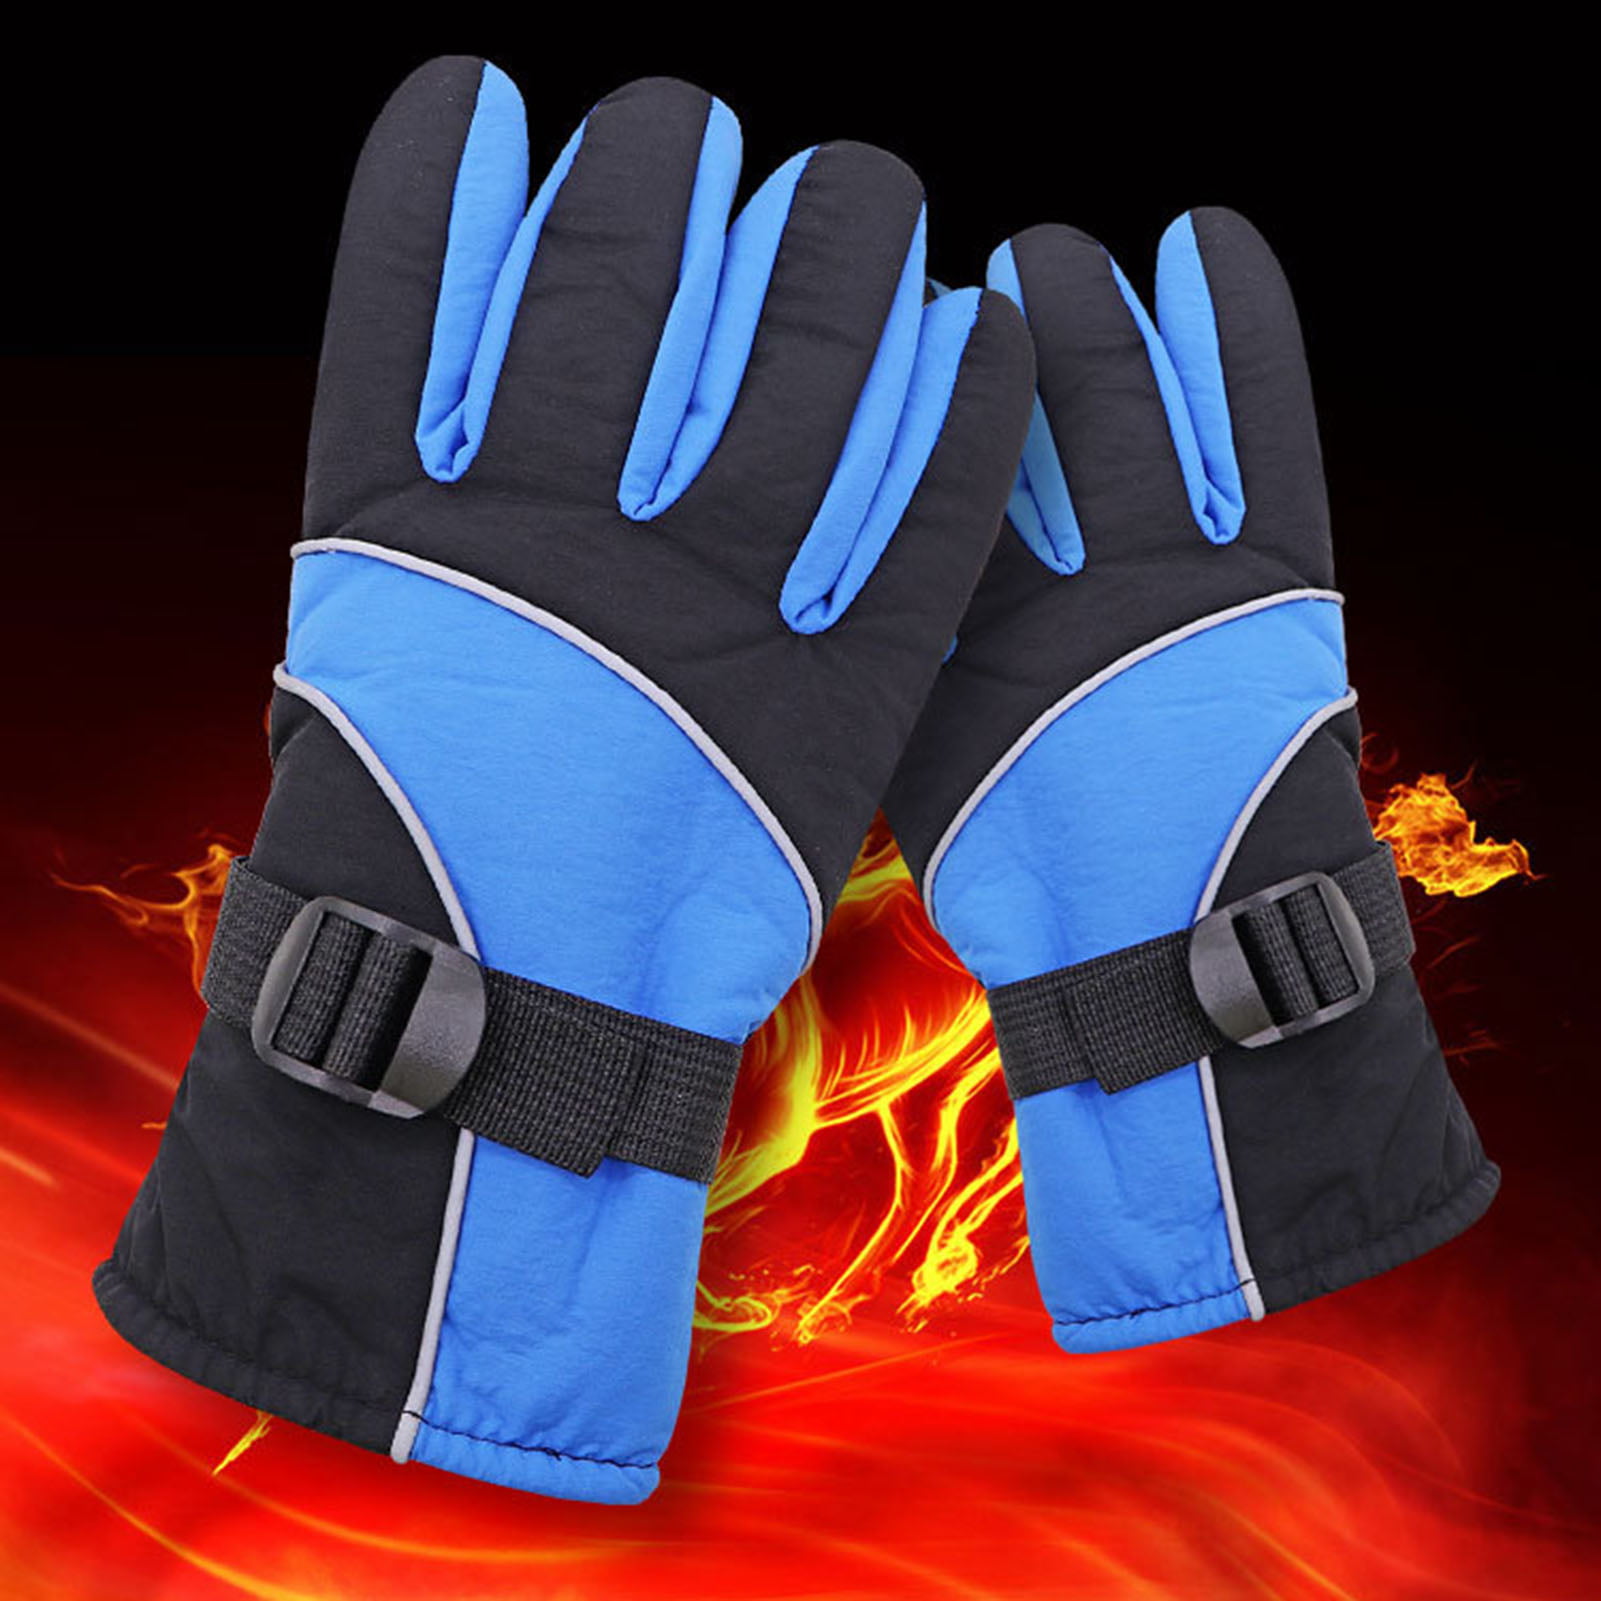 Details about   Cycling Gloves half finger design cycling motorcycle racing cross country USA 